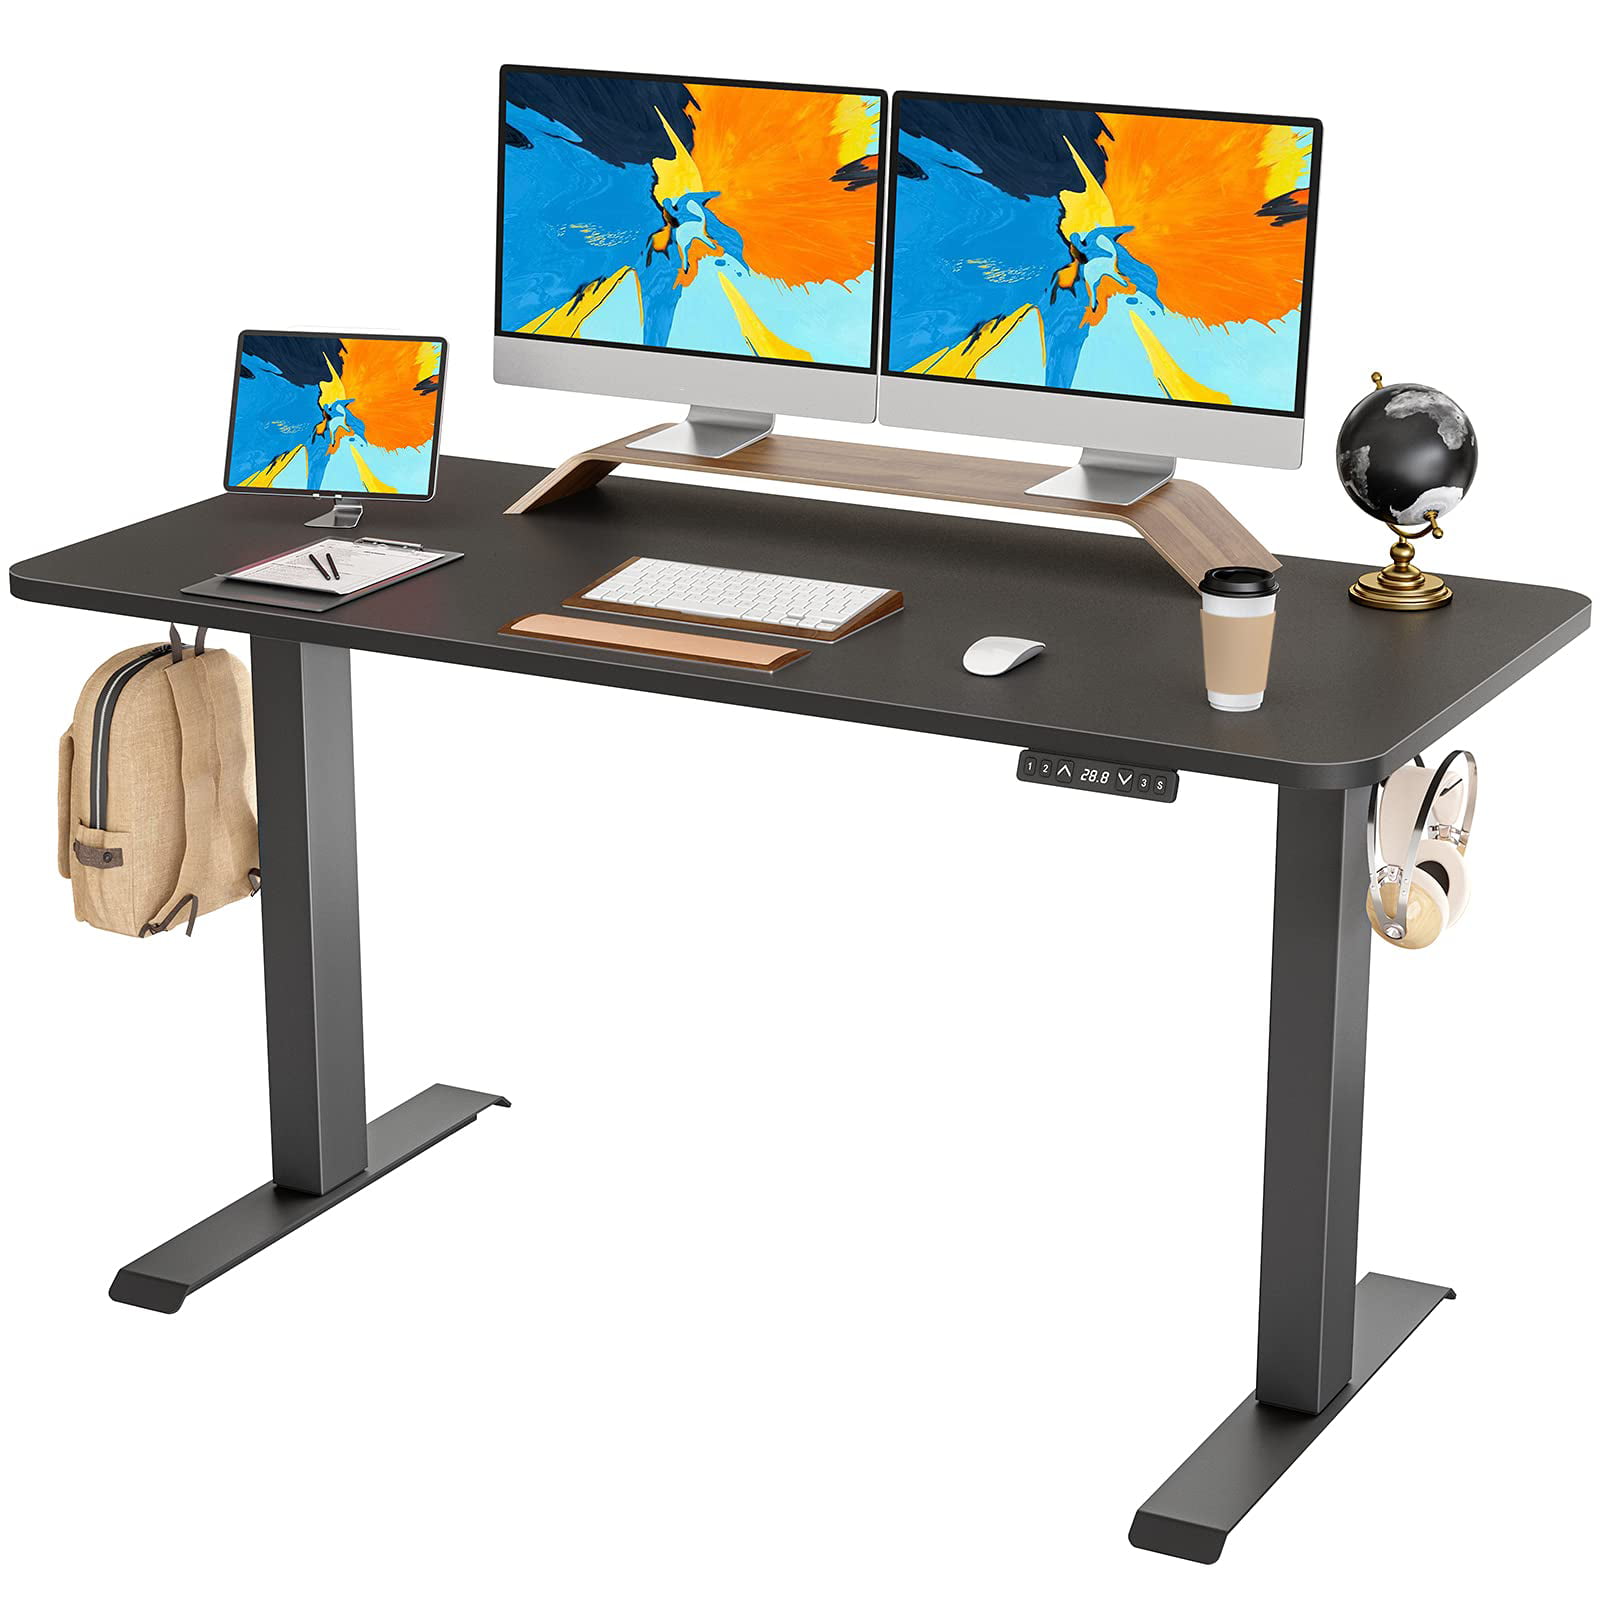 Full Sit Stand Home Office Table with Splice Board 48 Inches Height Adjustable Corner Desk Black Frame/Rustic Brown Top FEZIBO Dual Motor L-Shaped Electric Standing Desk